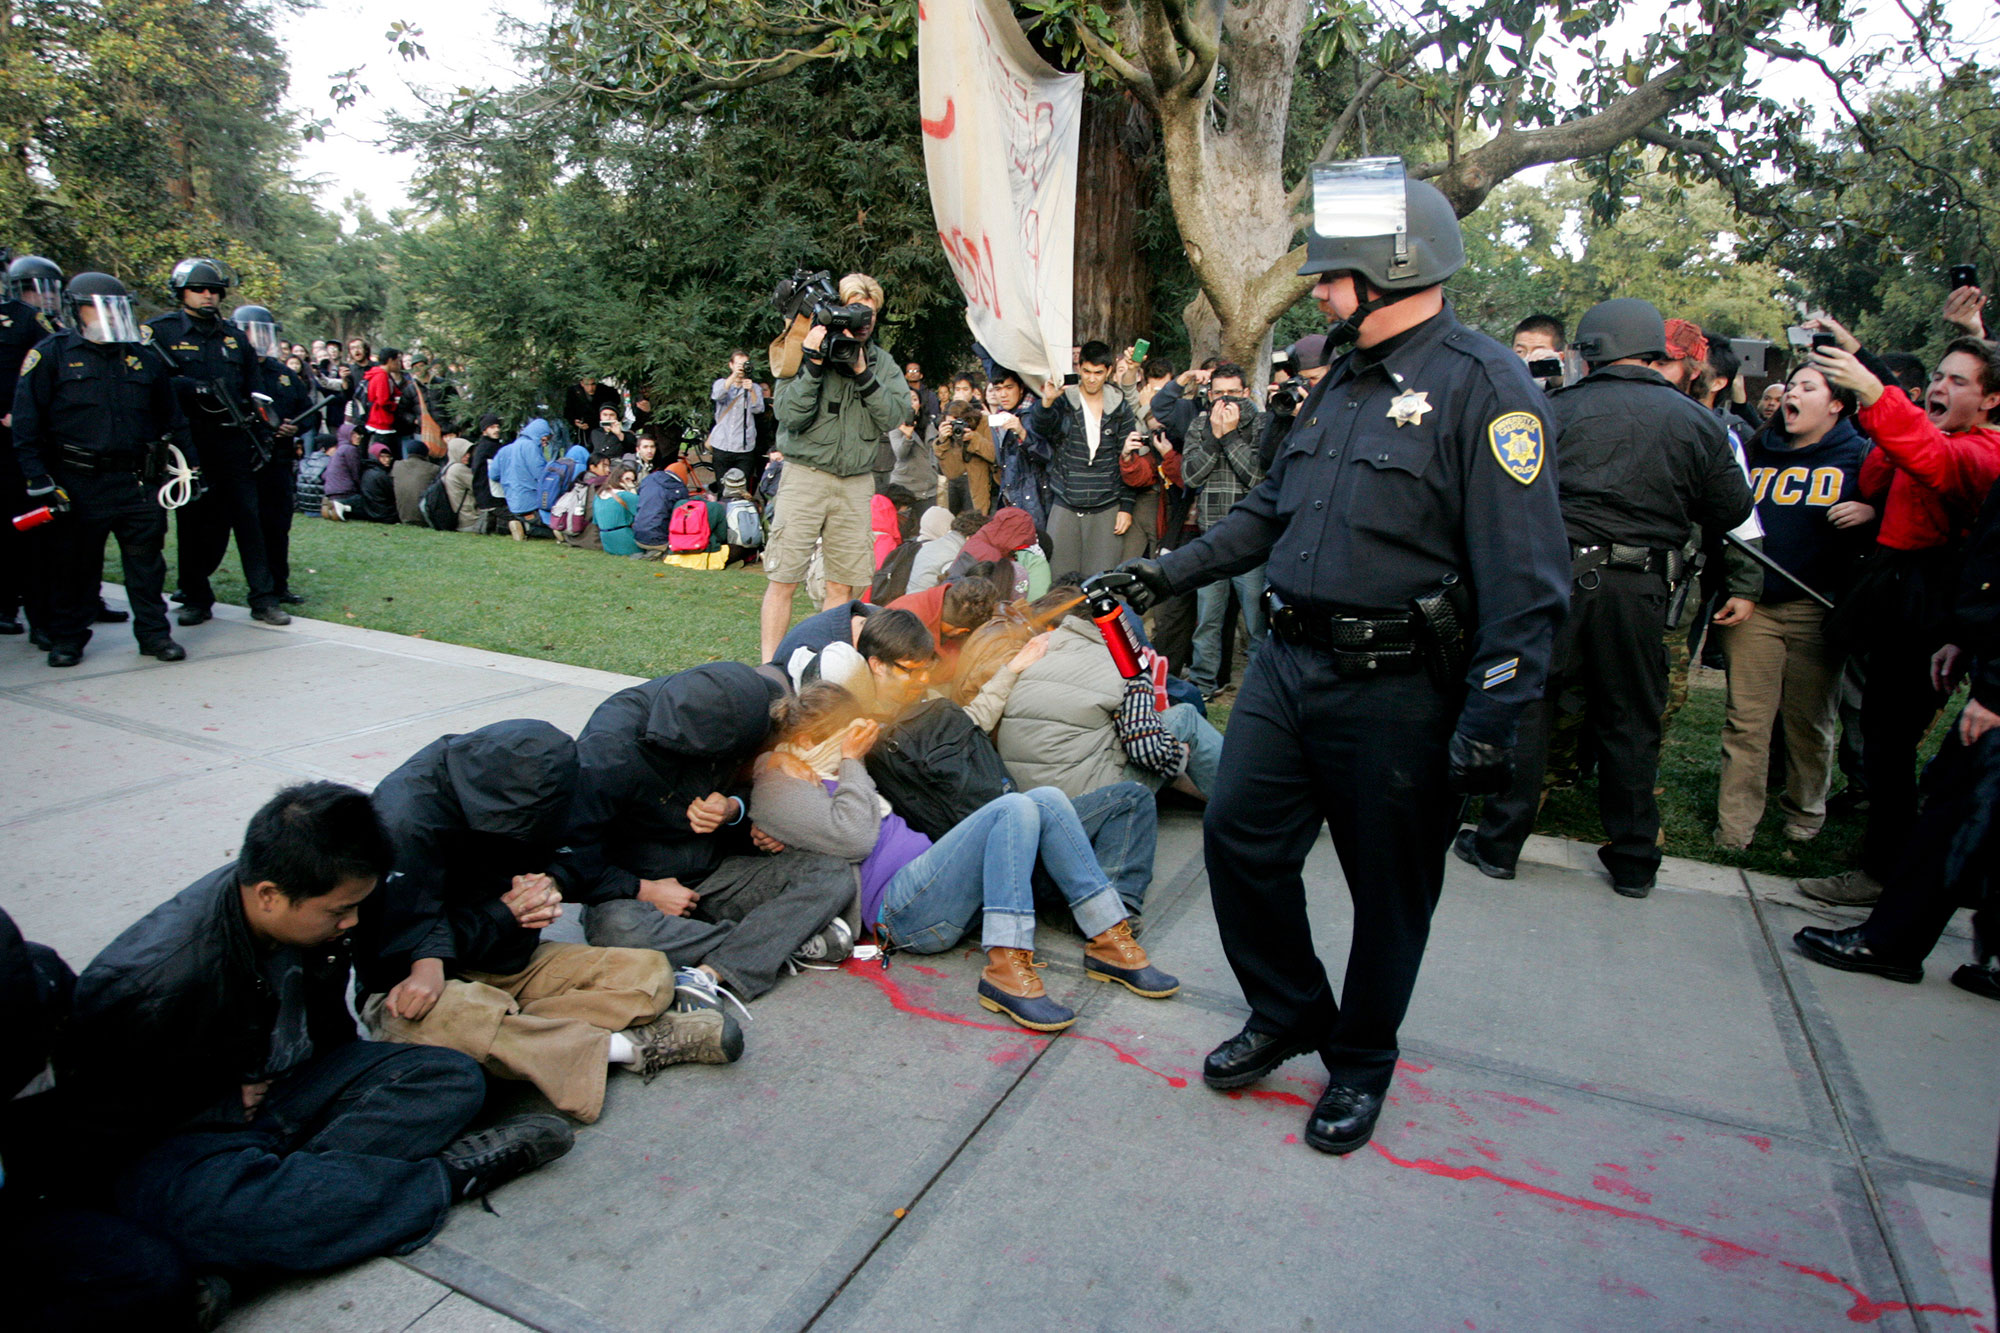 A University of California Davis police officer pepper-sprays students during their sit-in at an &quot;Occupy UCD&quot; demonstration in Davis